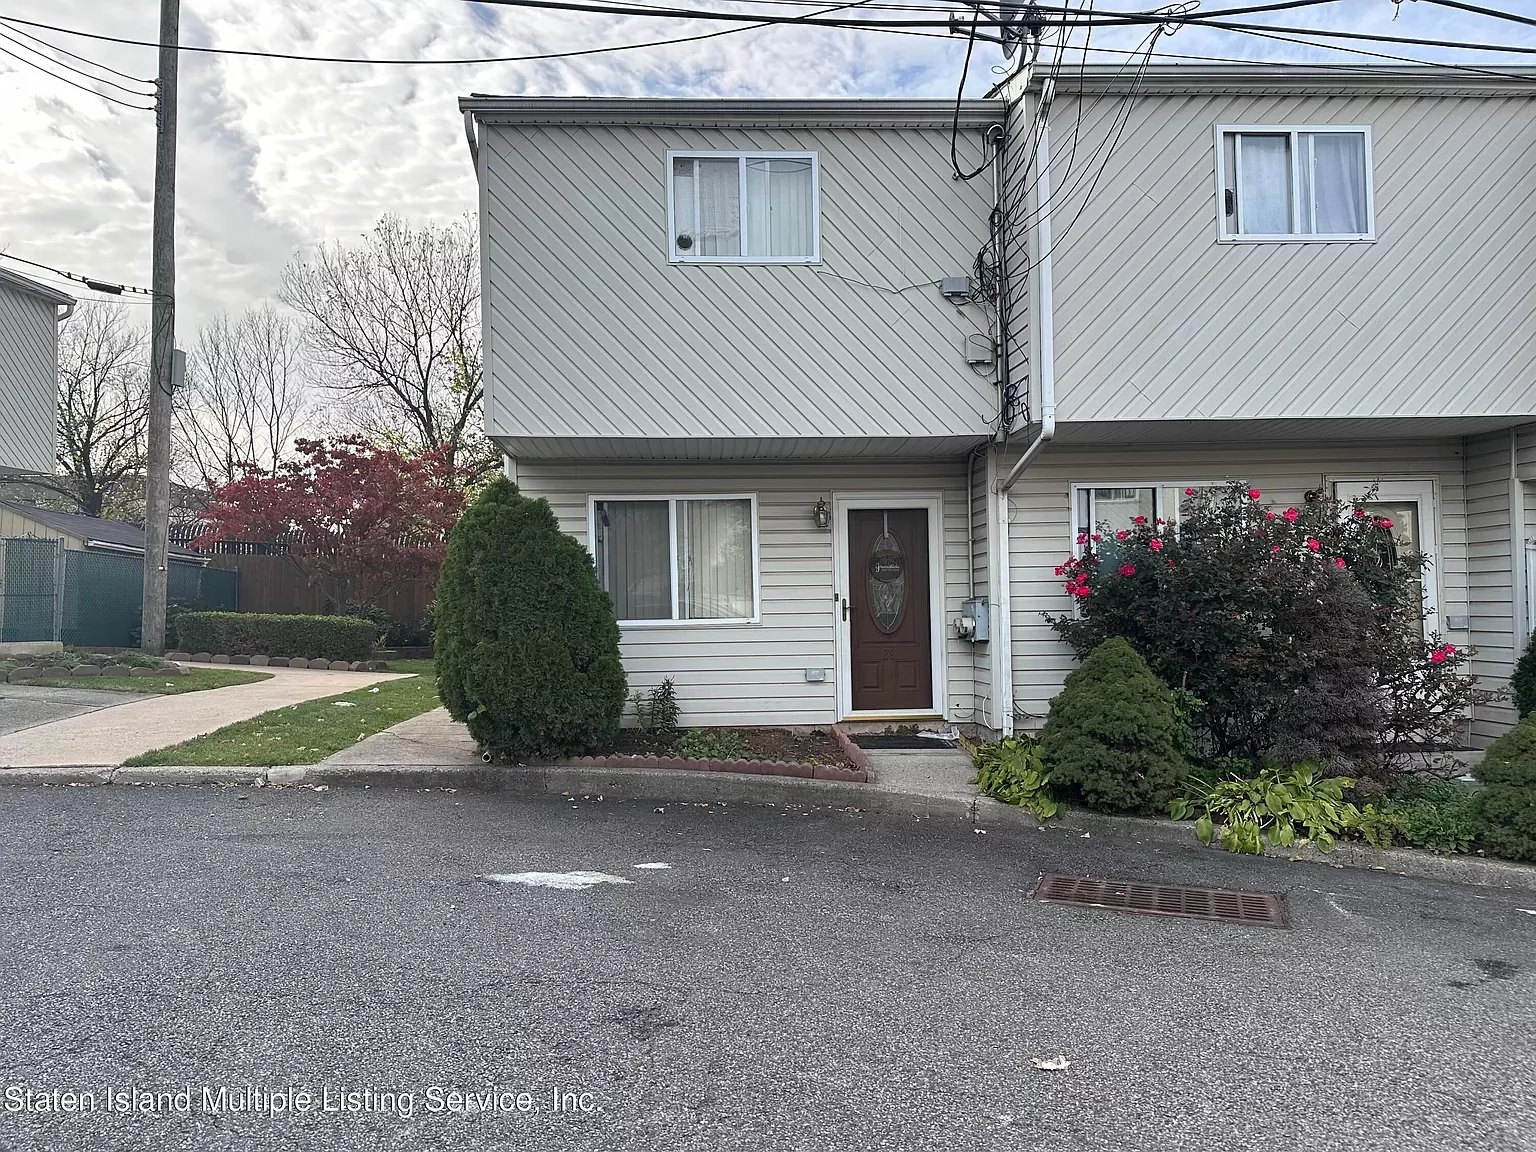 House for Sale in Arlington, Staten Island New York